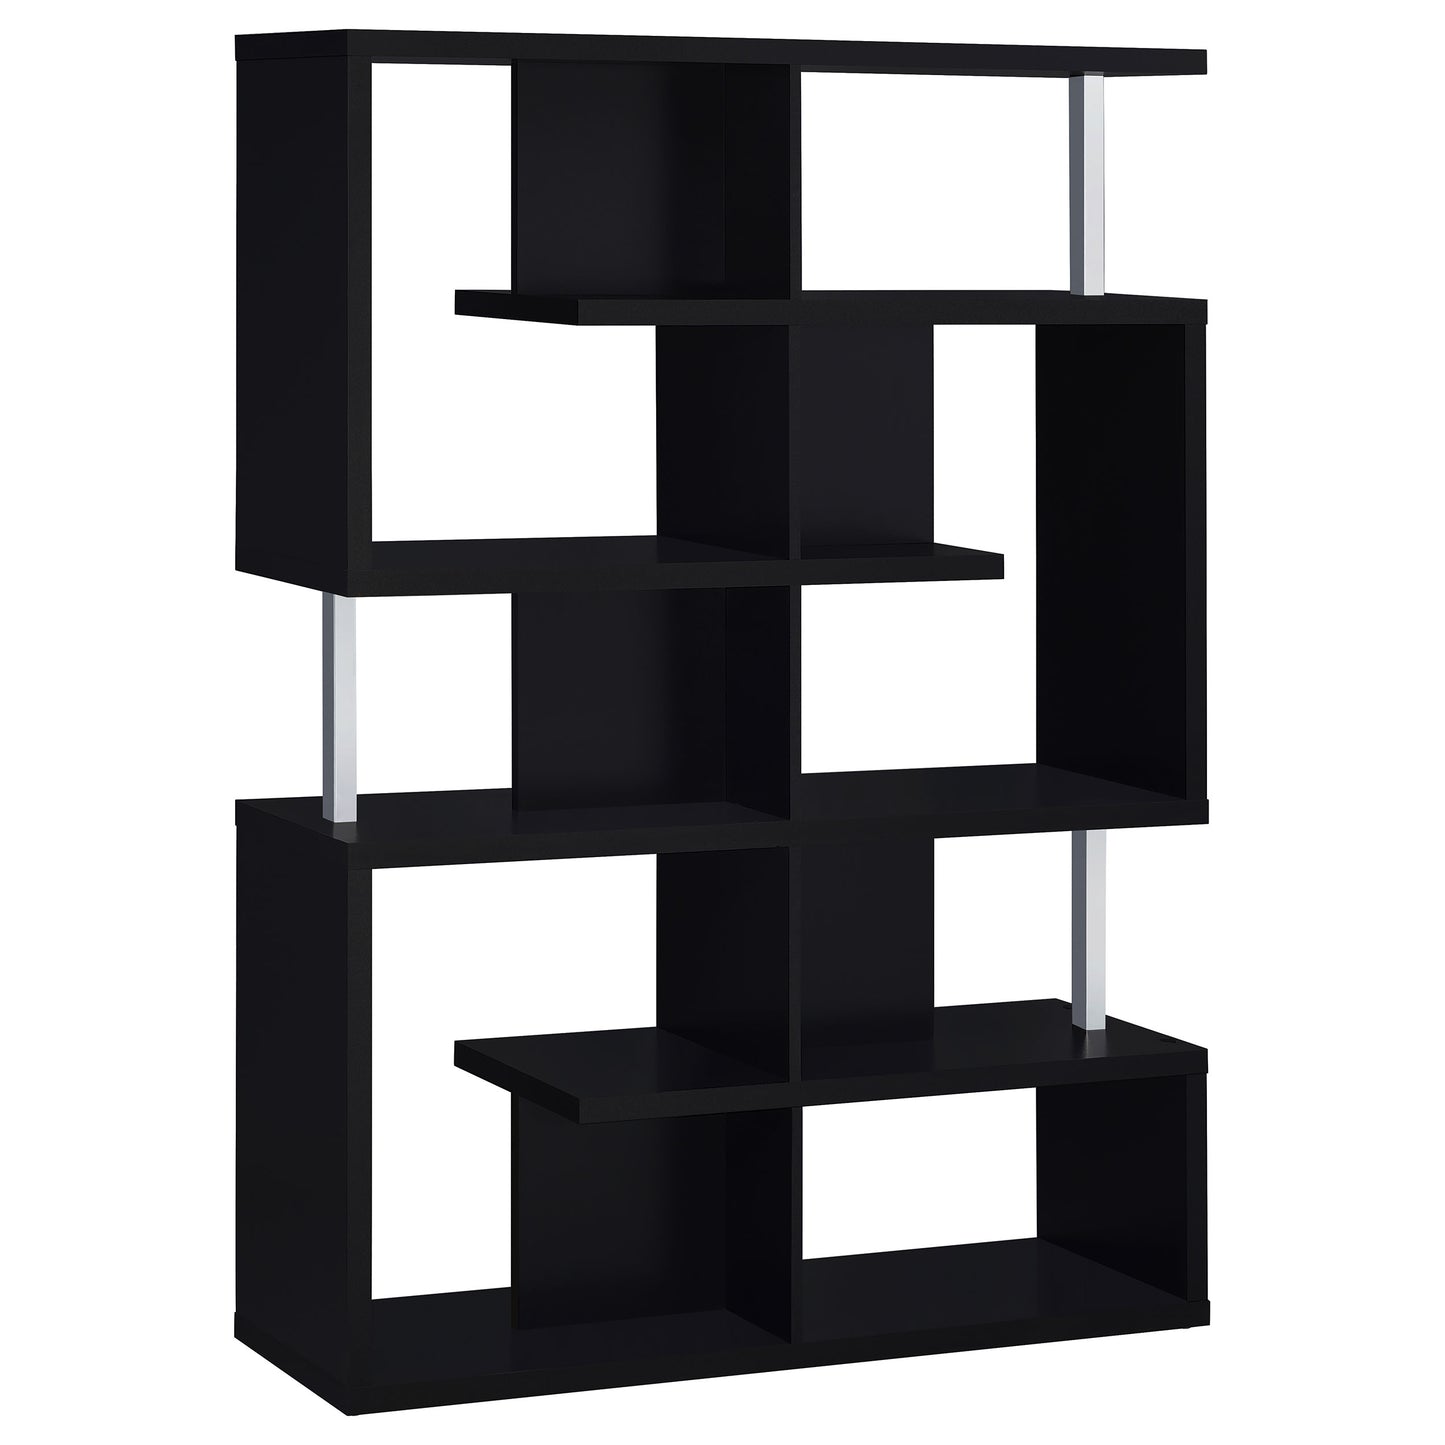 Hoover 5-tier Bookcase Black and Chrome